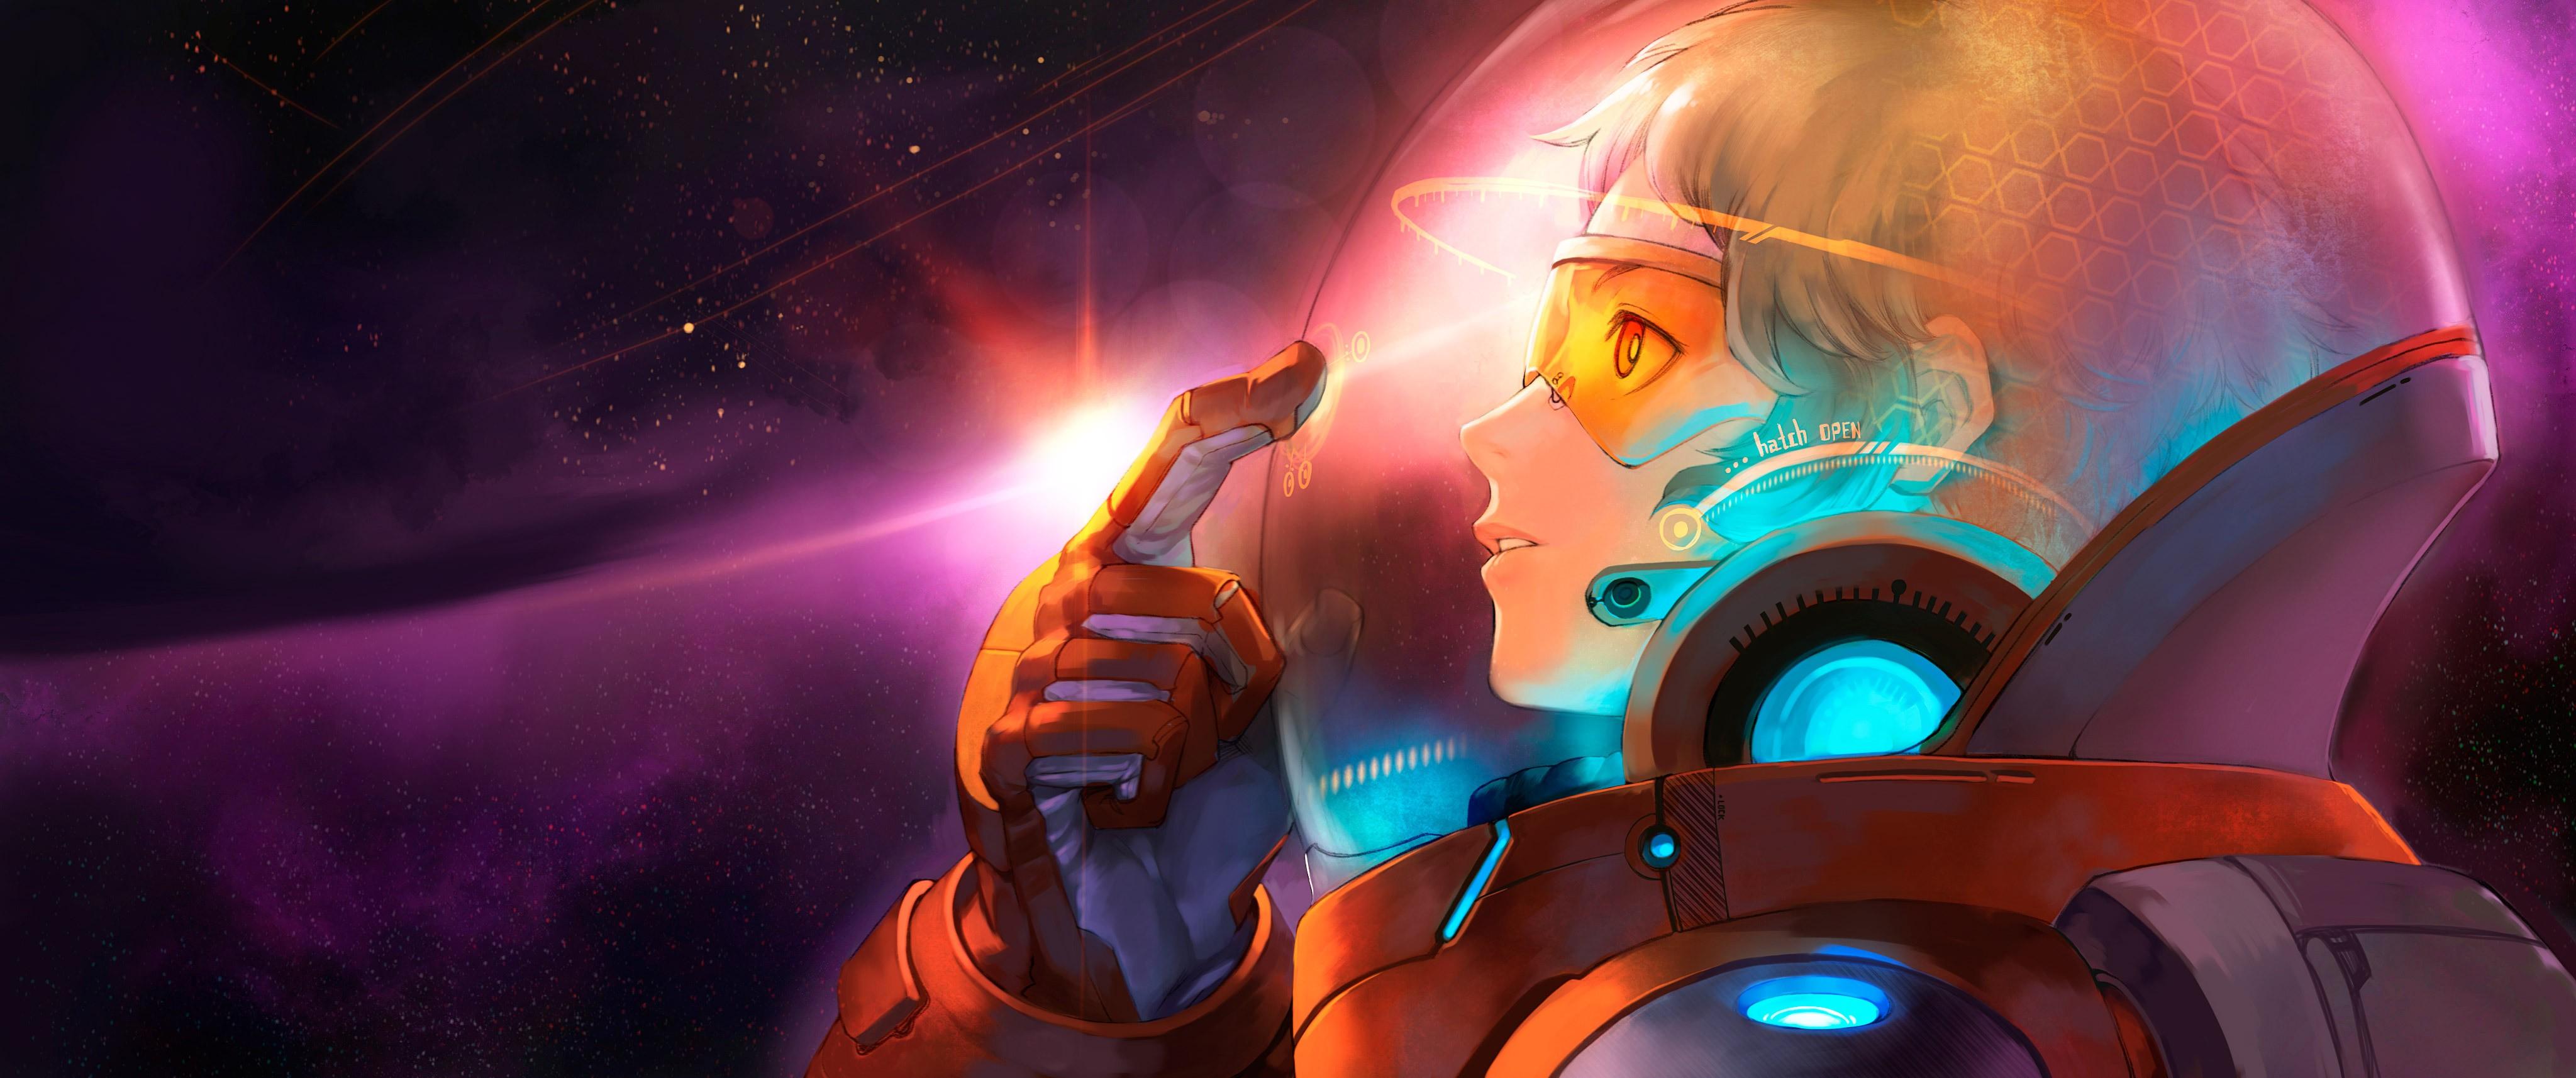 #space suit, #space, #anime, #anime girls, wallpaper